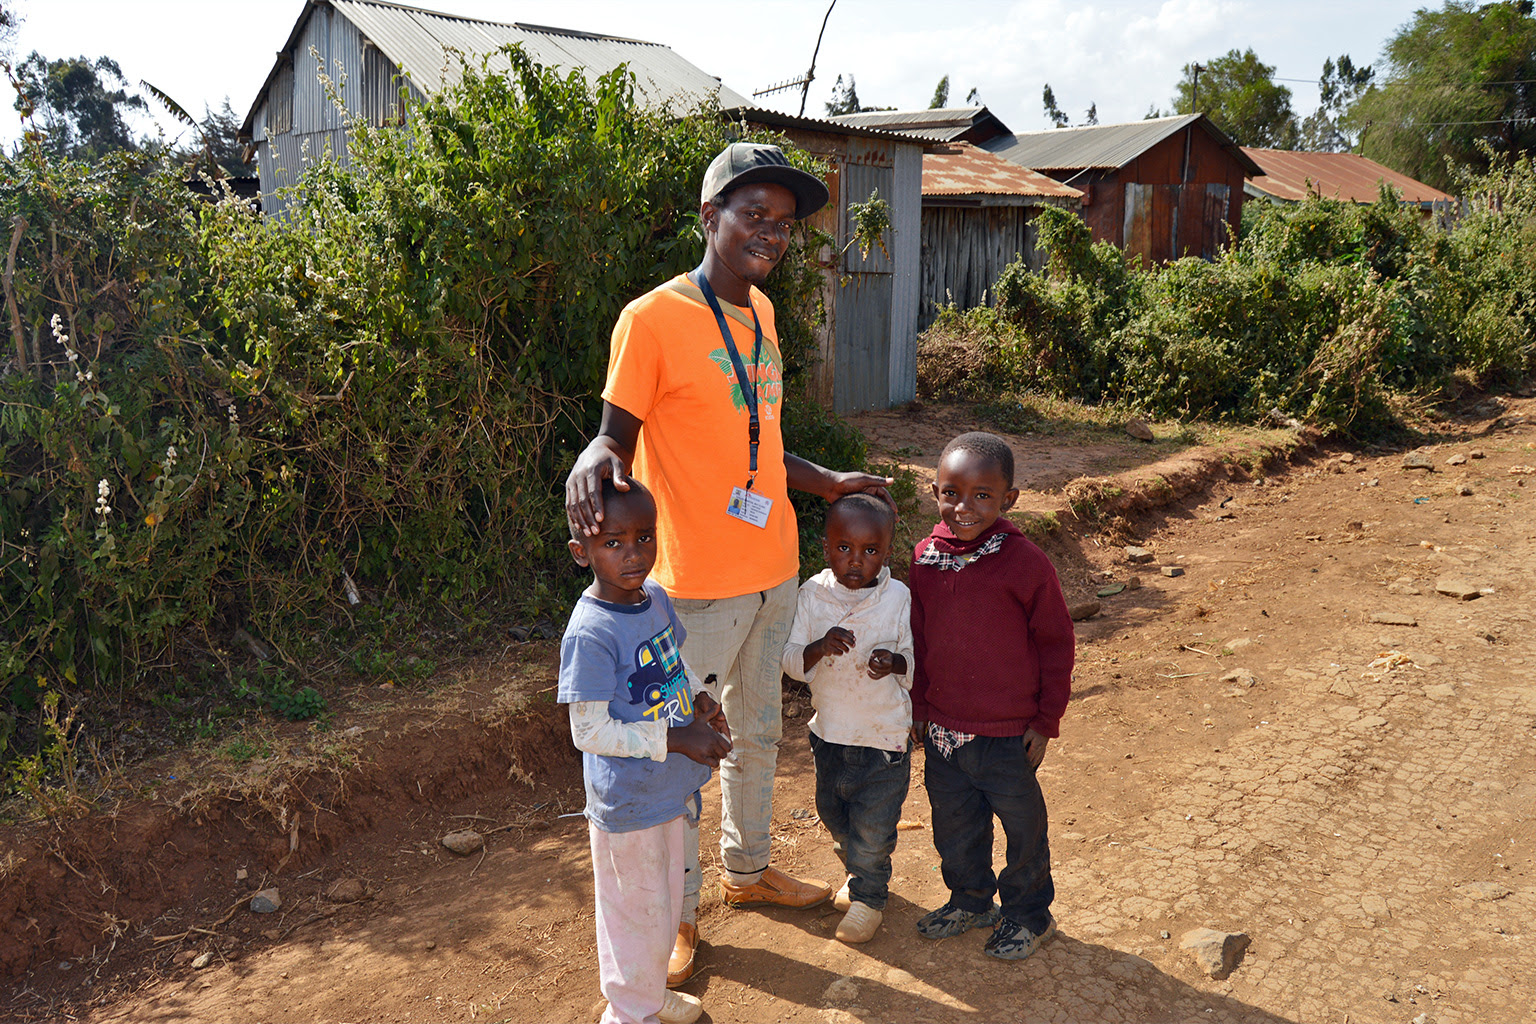 George Karanja with his children and a neighbor's child.